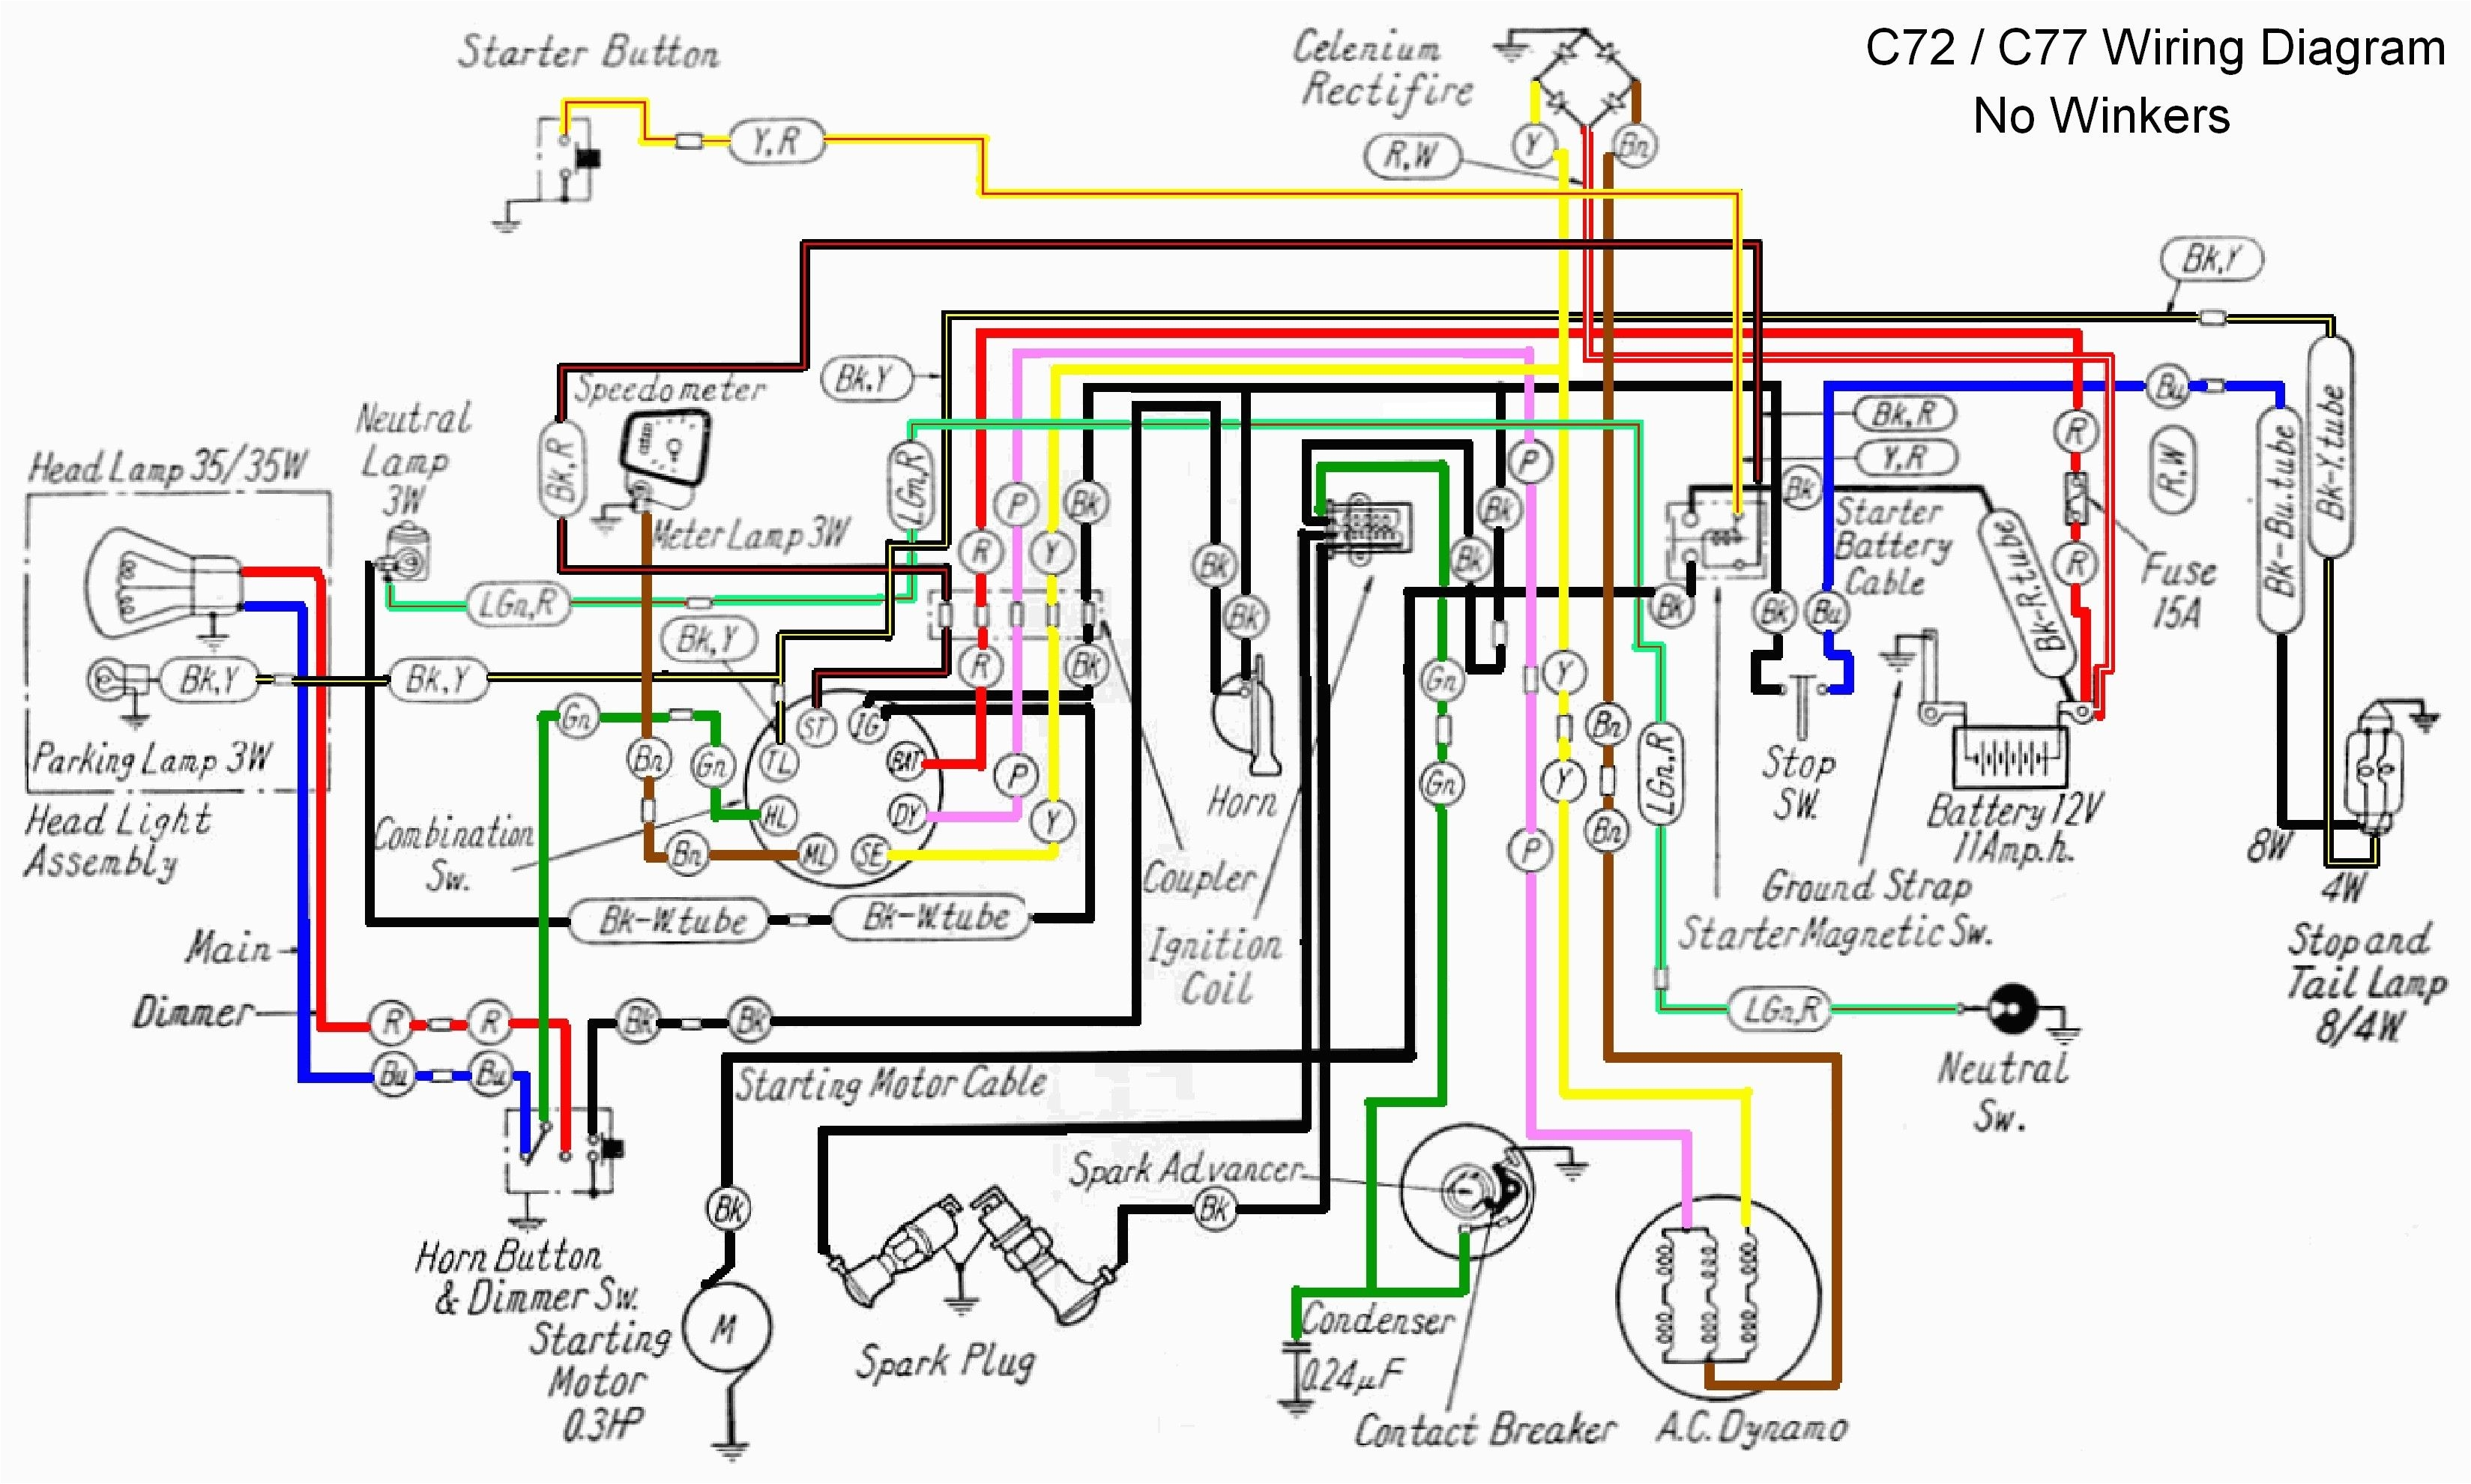 wiring diagram 50cc scooter drive pulley honda 70cc dirt bike motorcycle wiring diagram engine wiring harness diagram